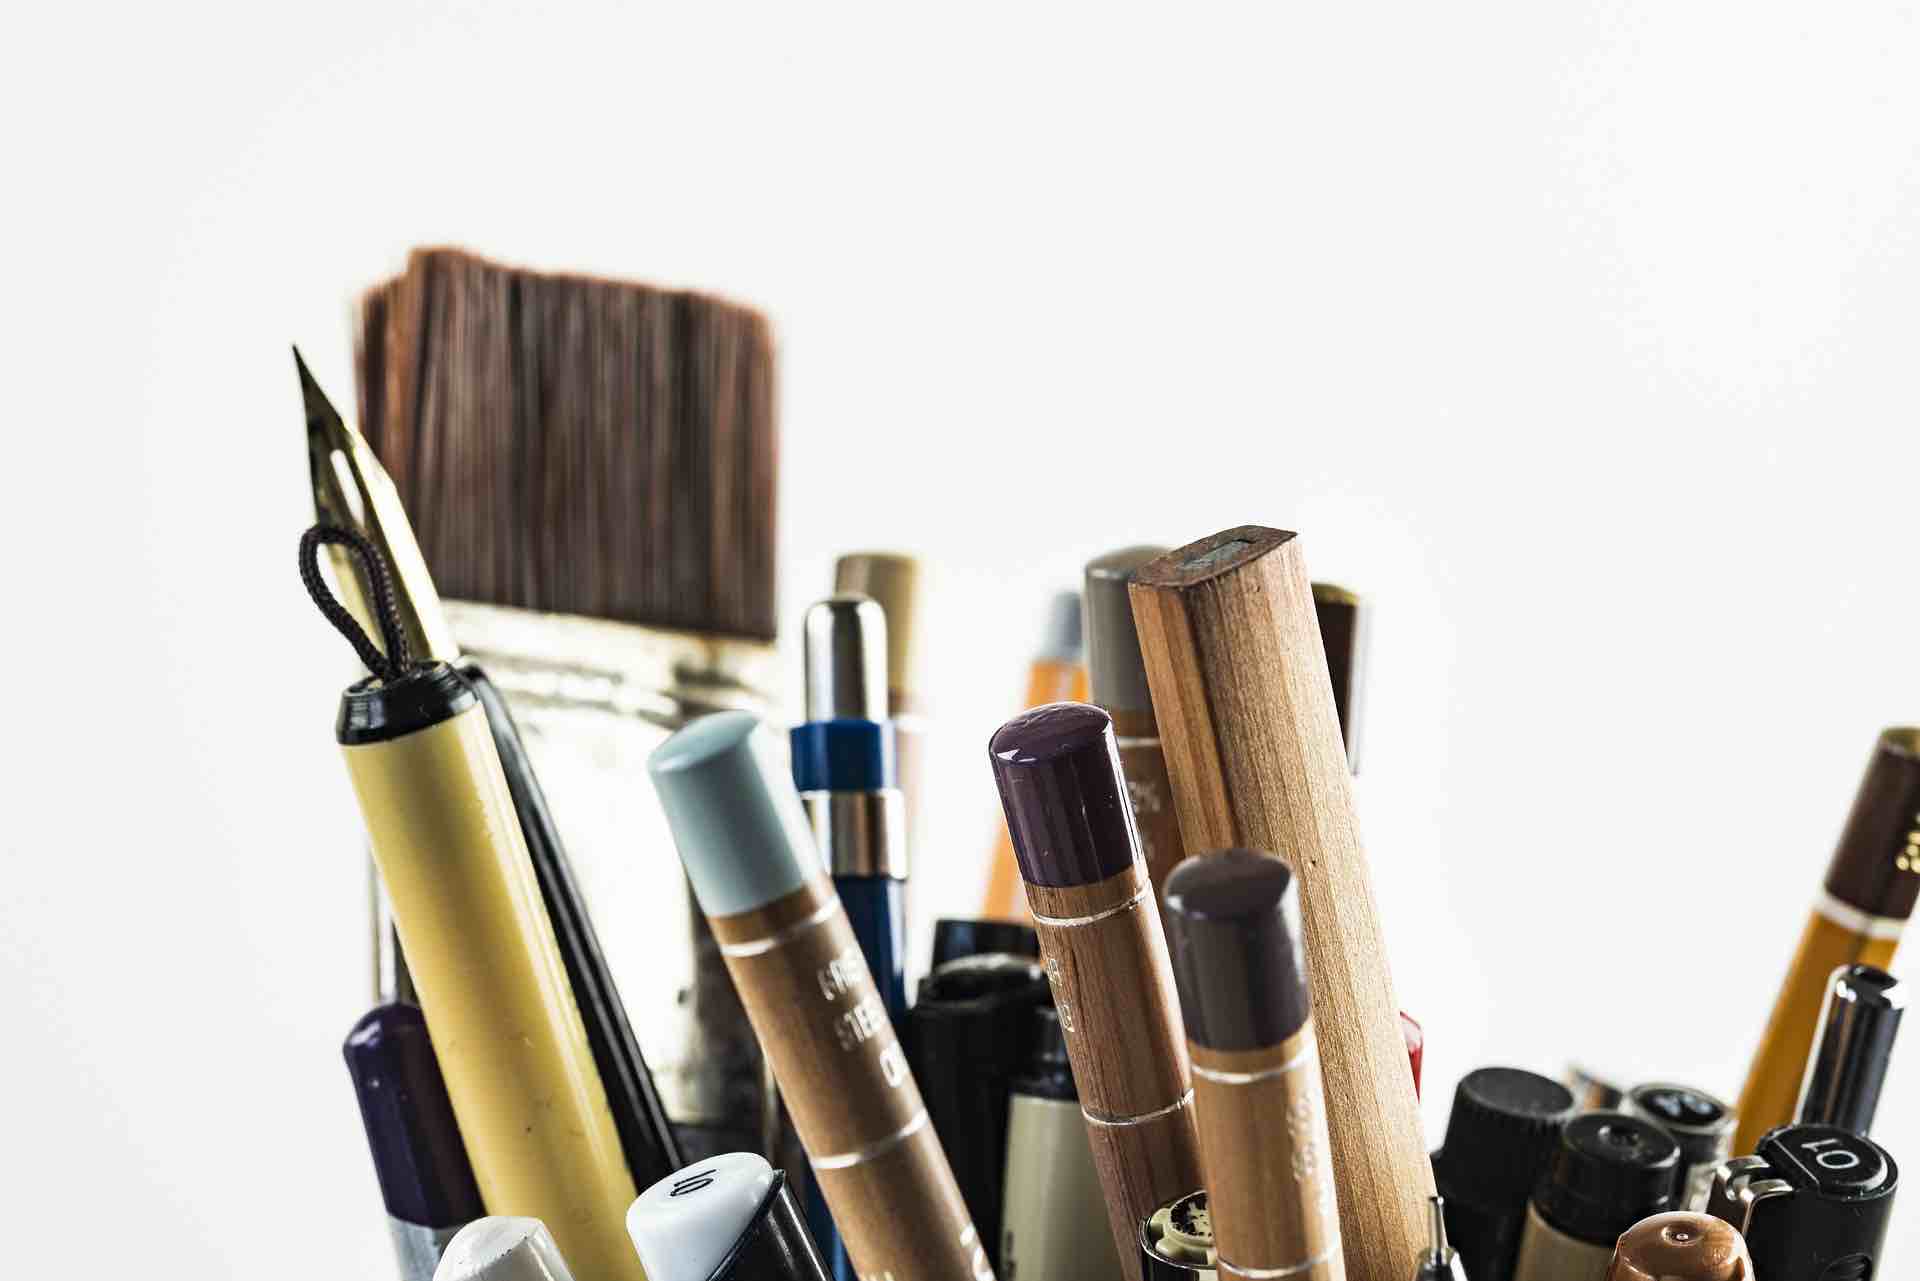 Photo of a Scenic Artist's pens and brushes.